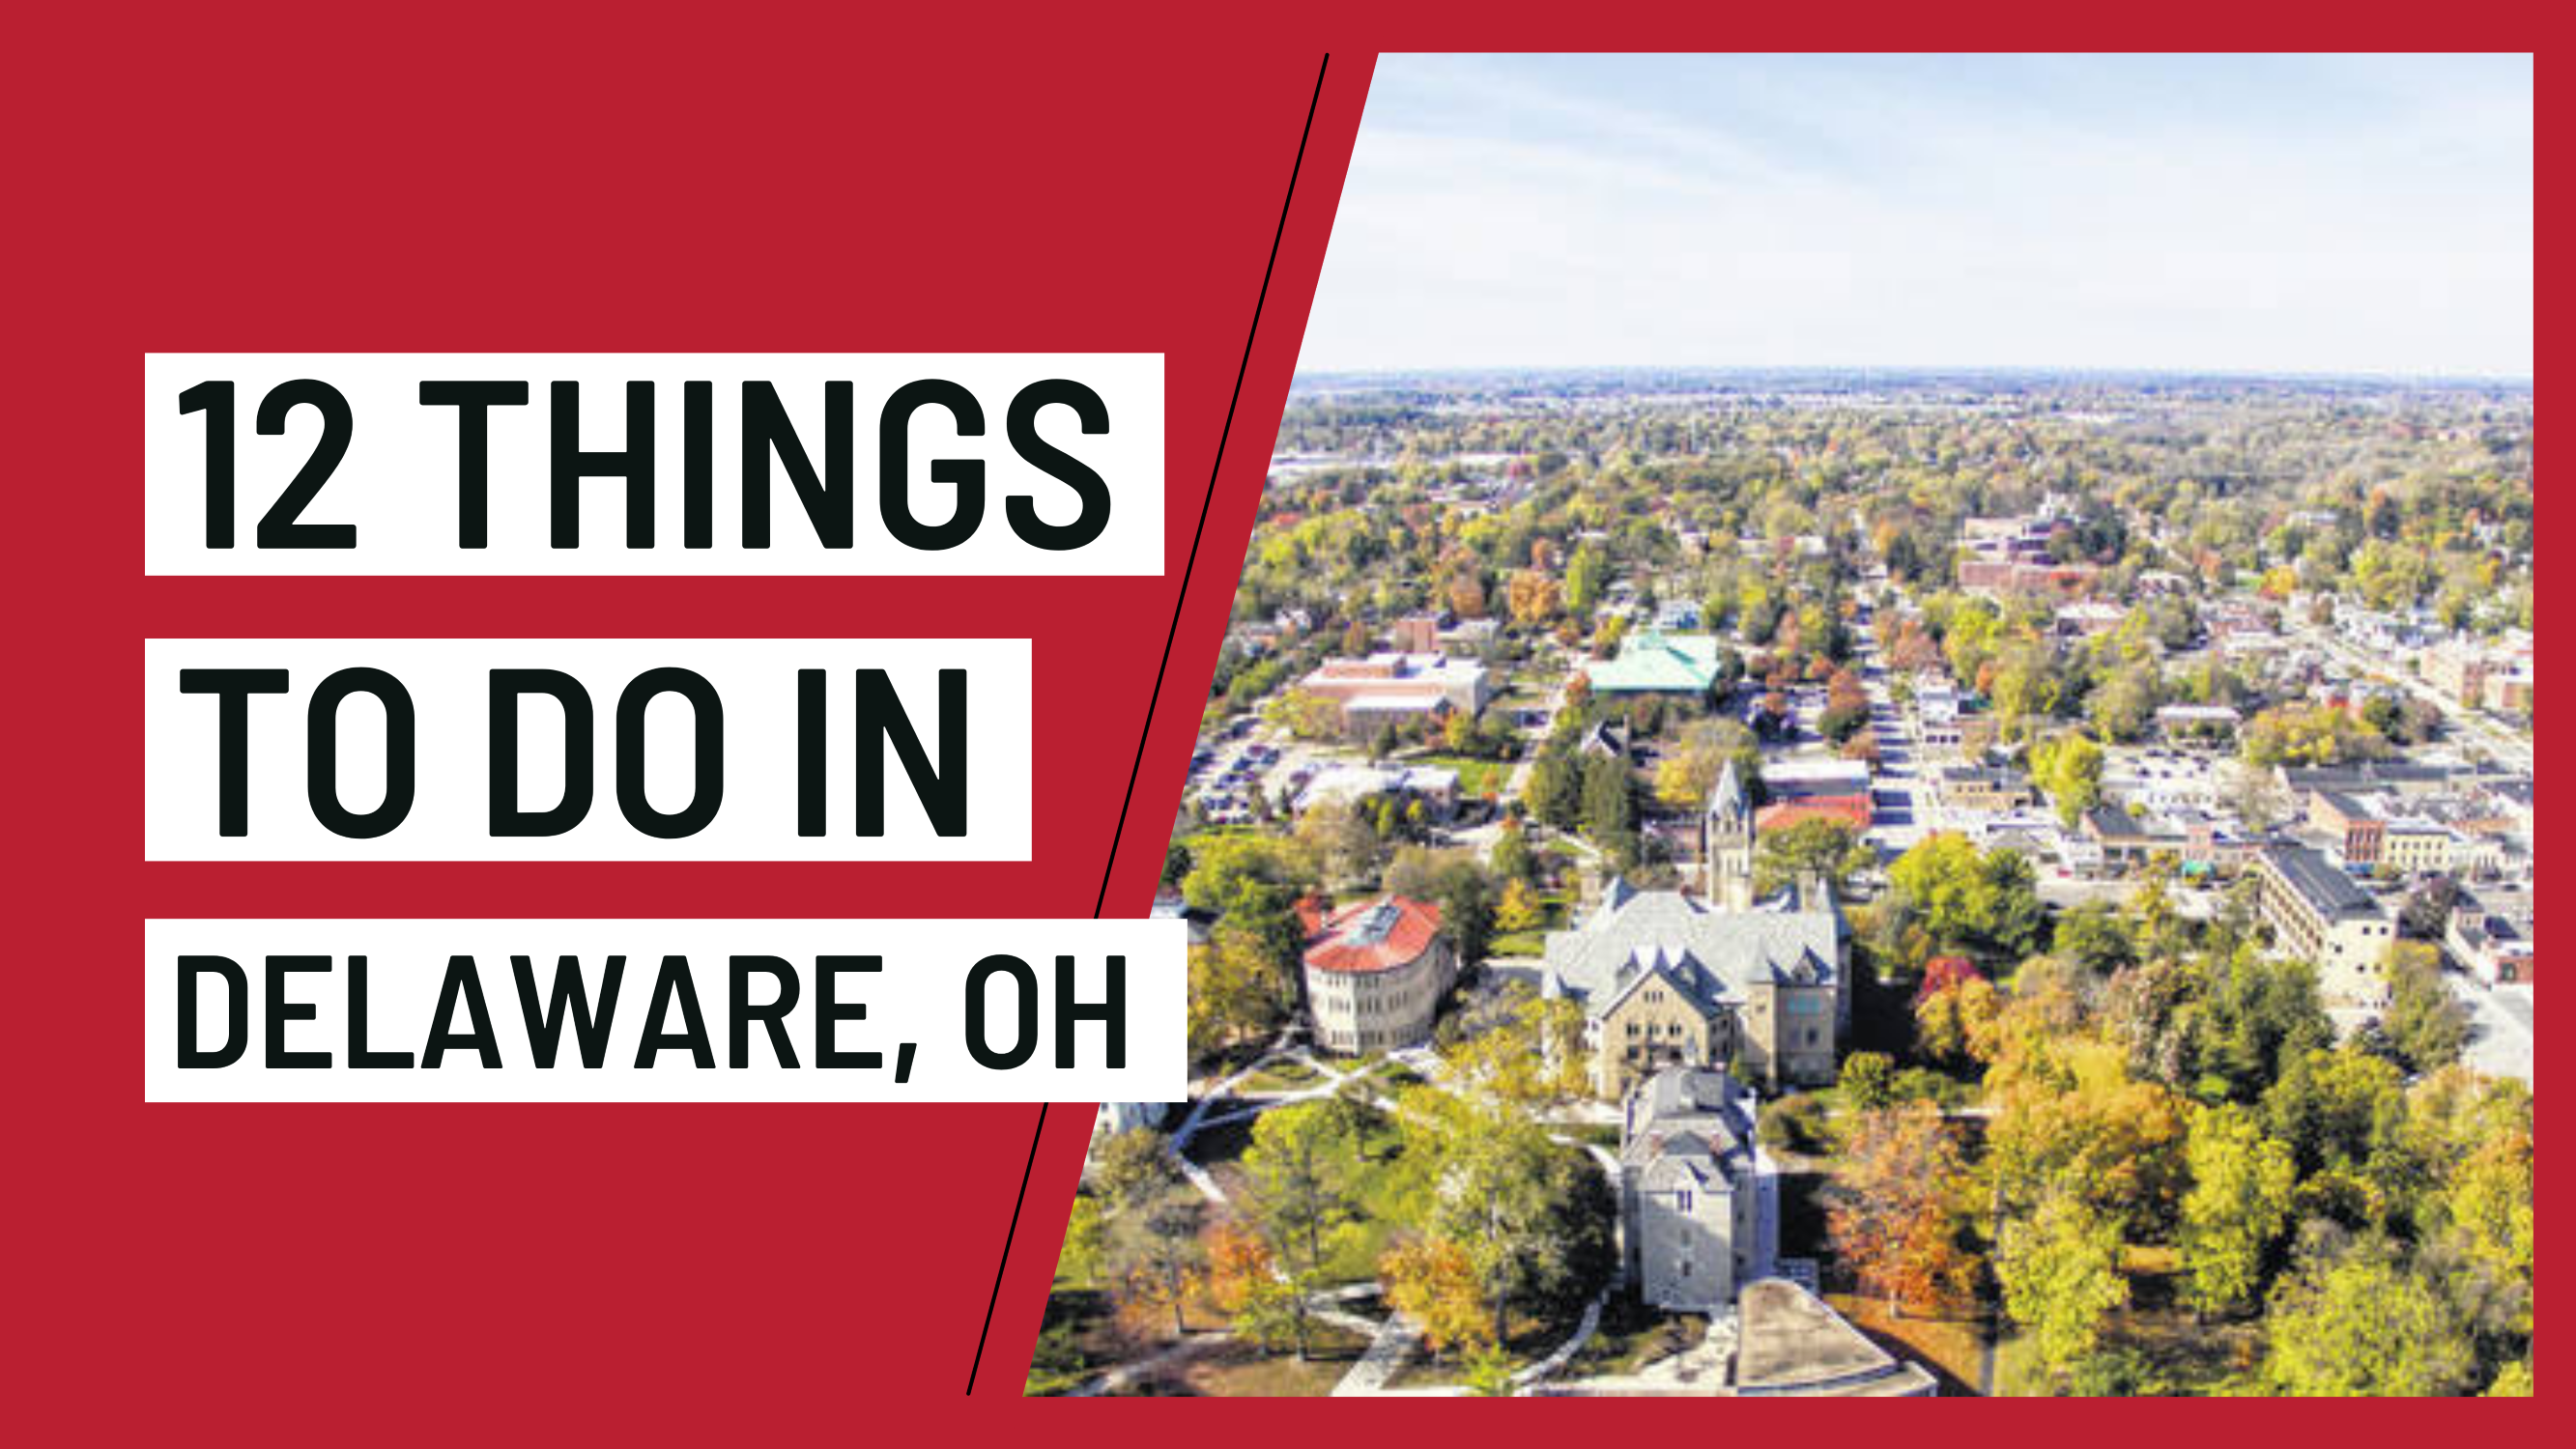 12 Things to do in Delaware, Ohio!